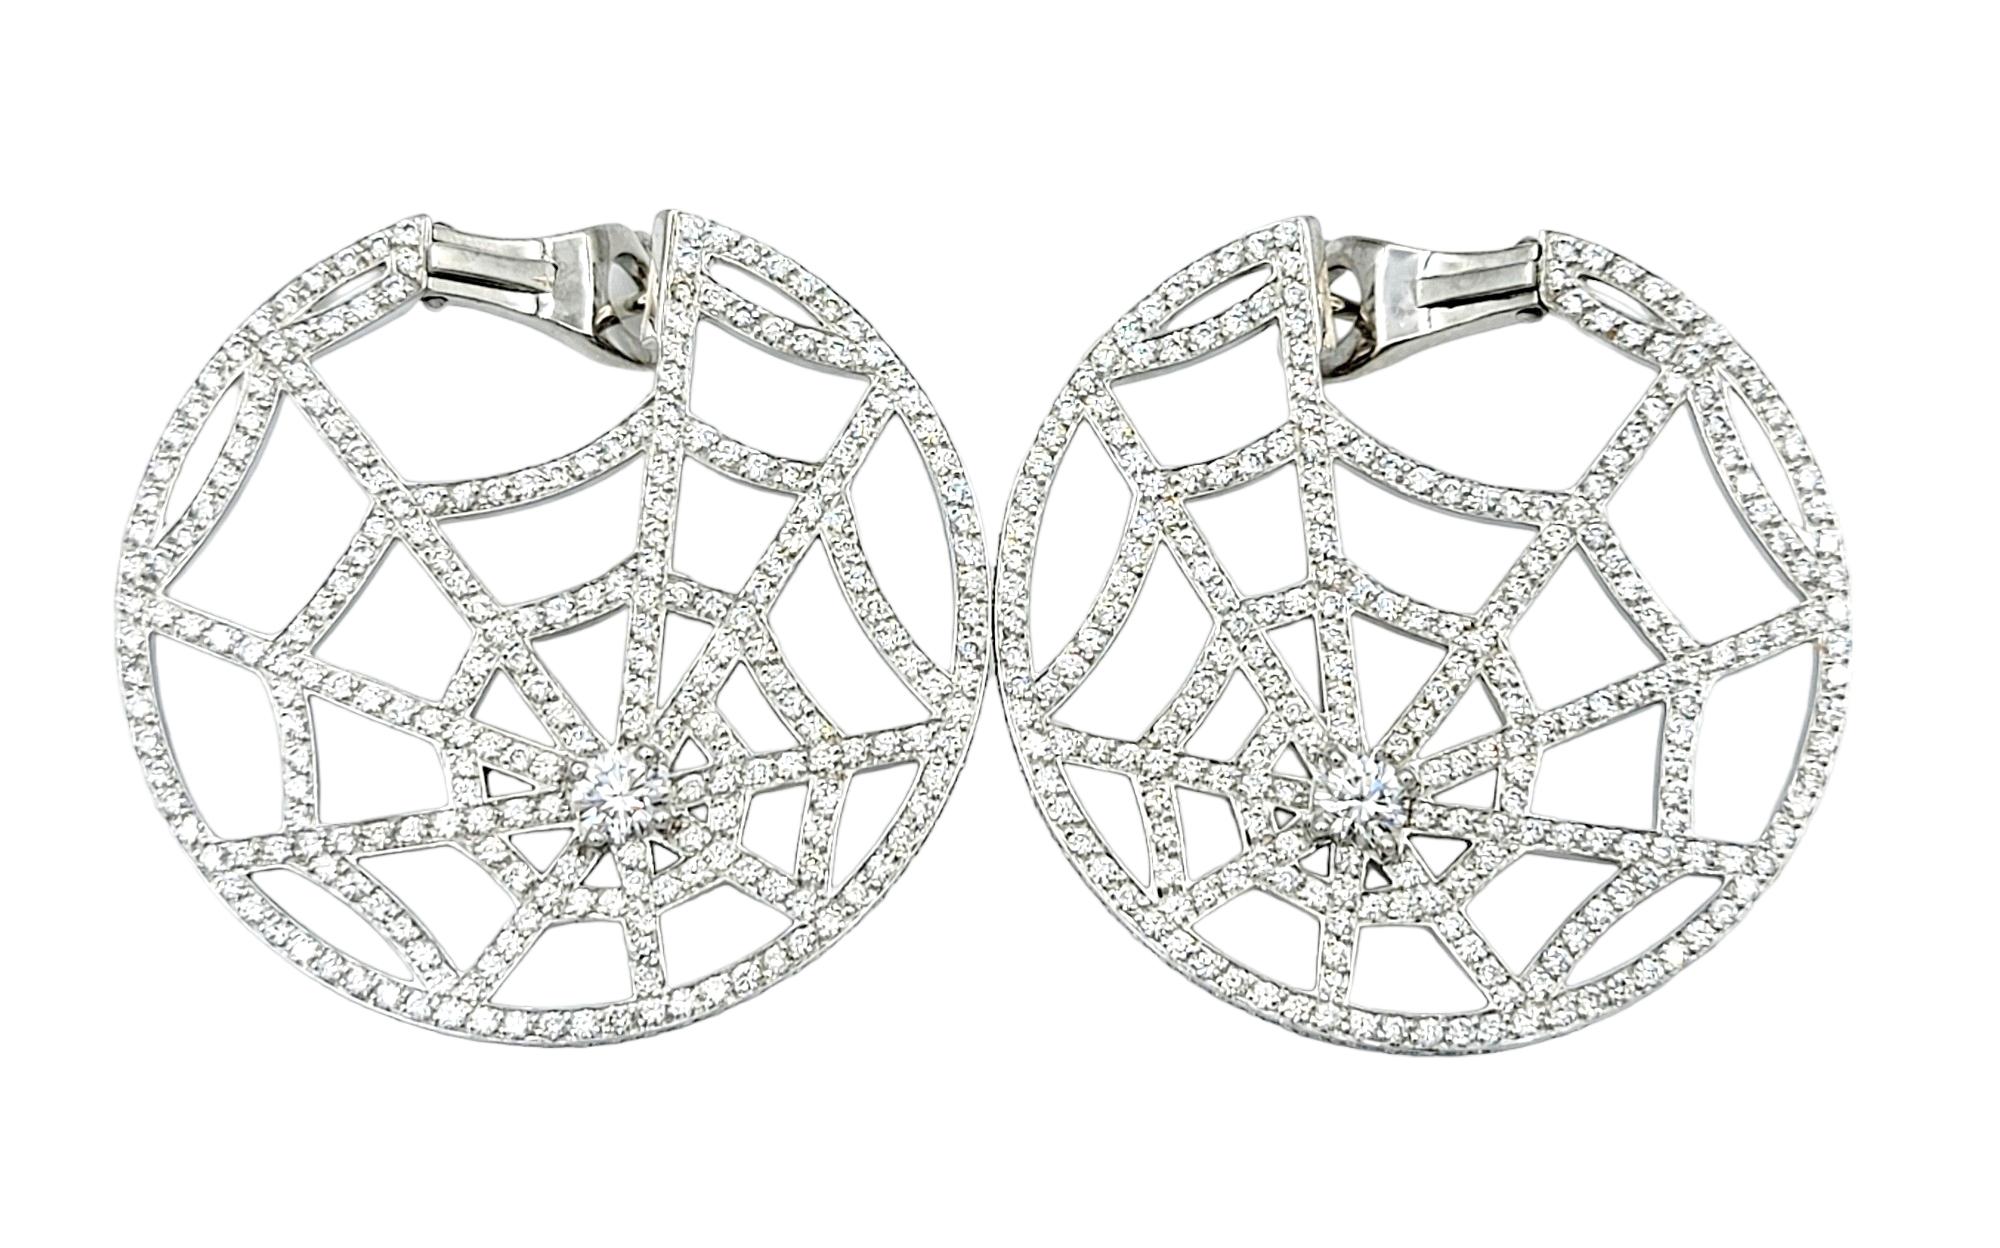 These captivating and unique Chaumet diamond spiderweb earrings are a truly dazzling pair that embody sophistication and artistry. Crafted with meticulous attention to detail, these fabulous designer earrings showcase Chaumet's renowned